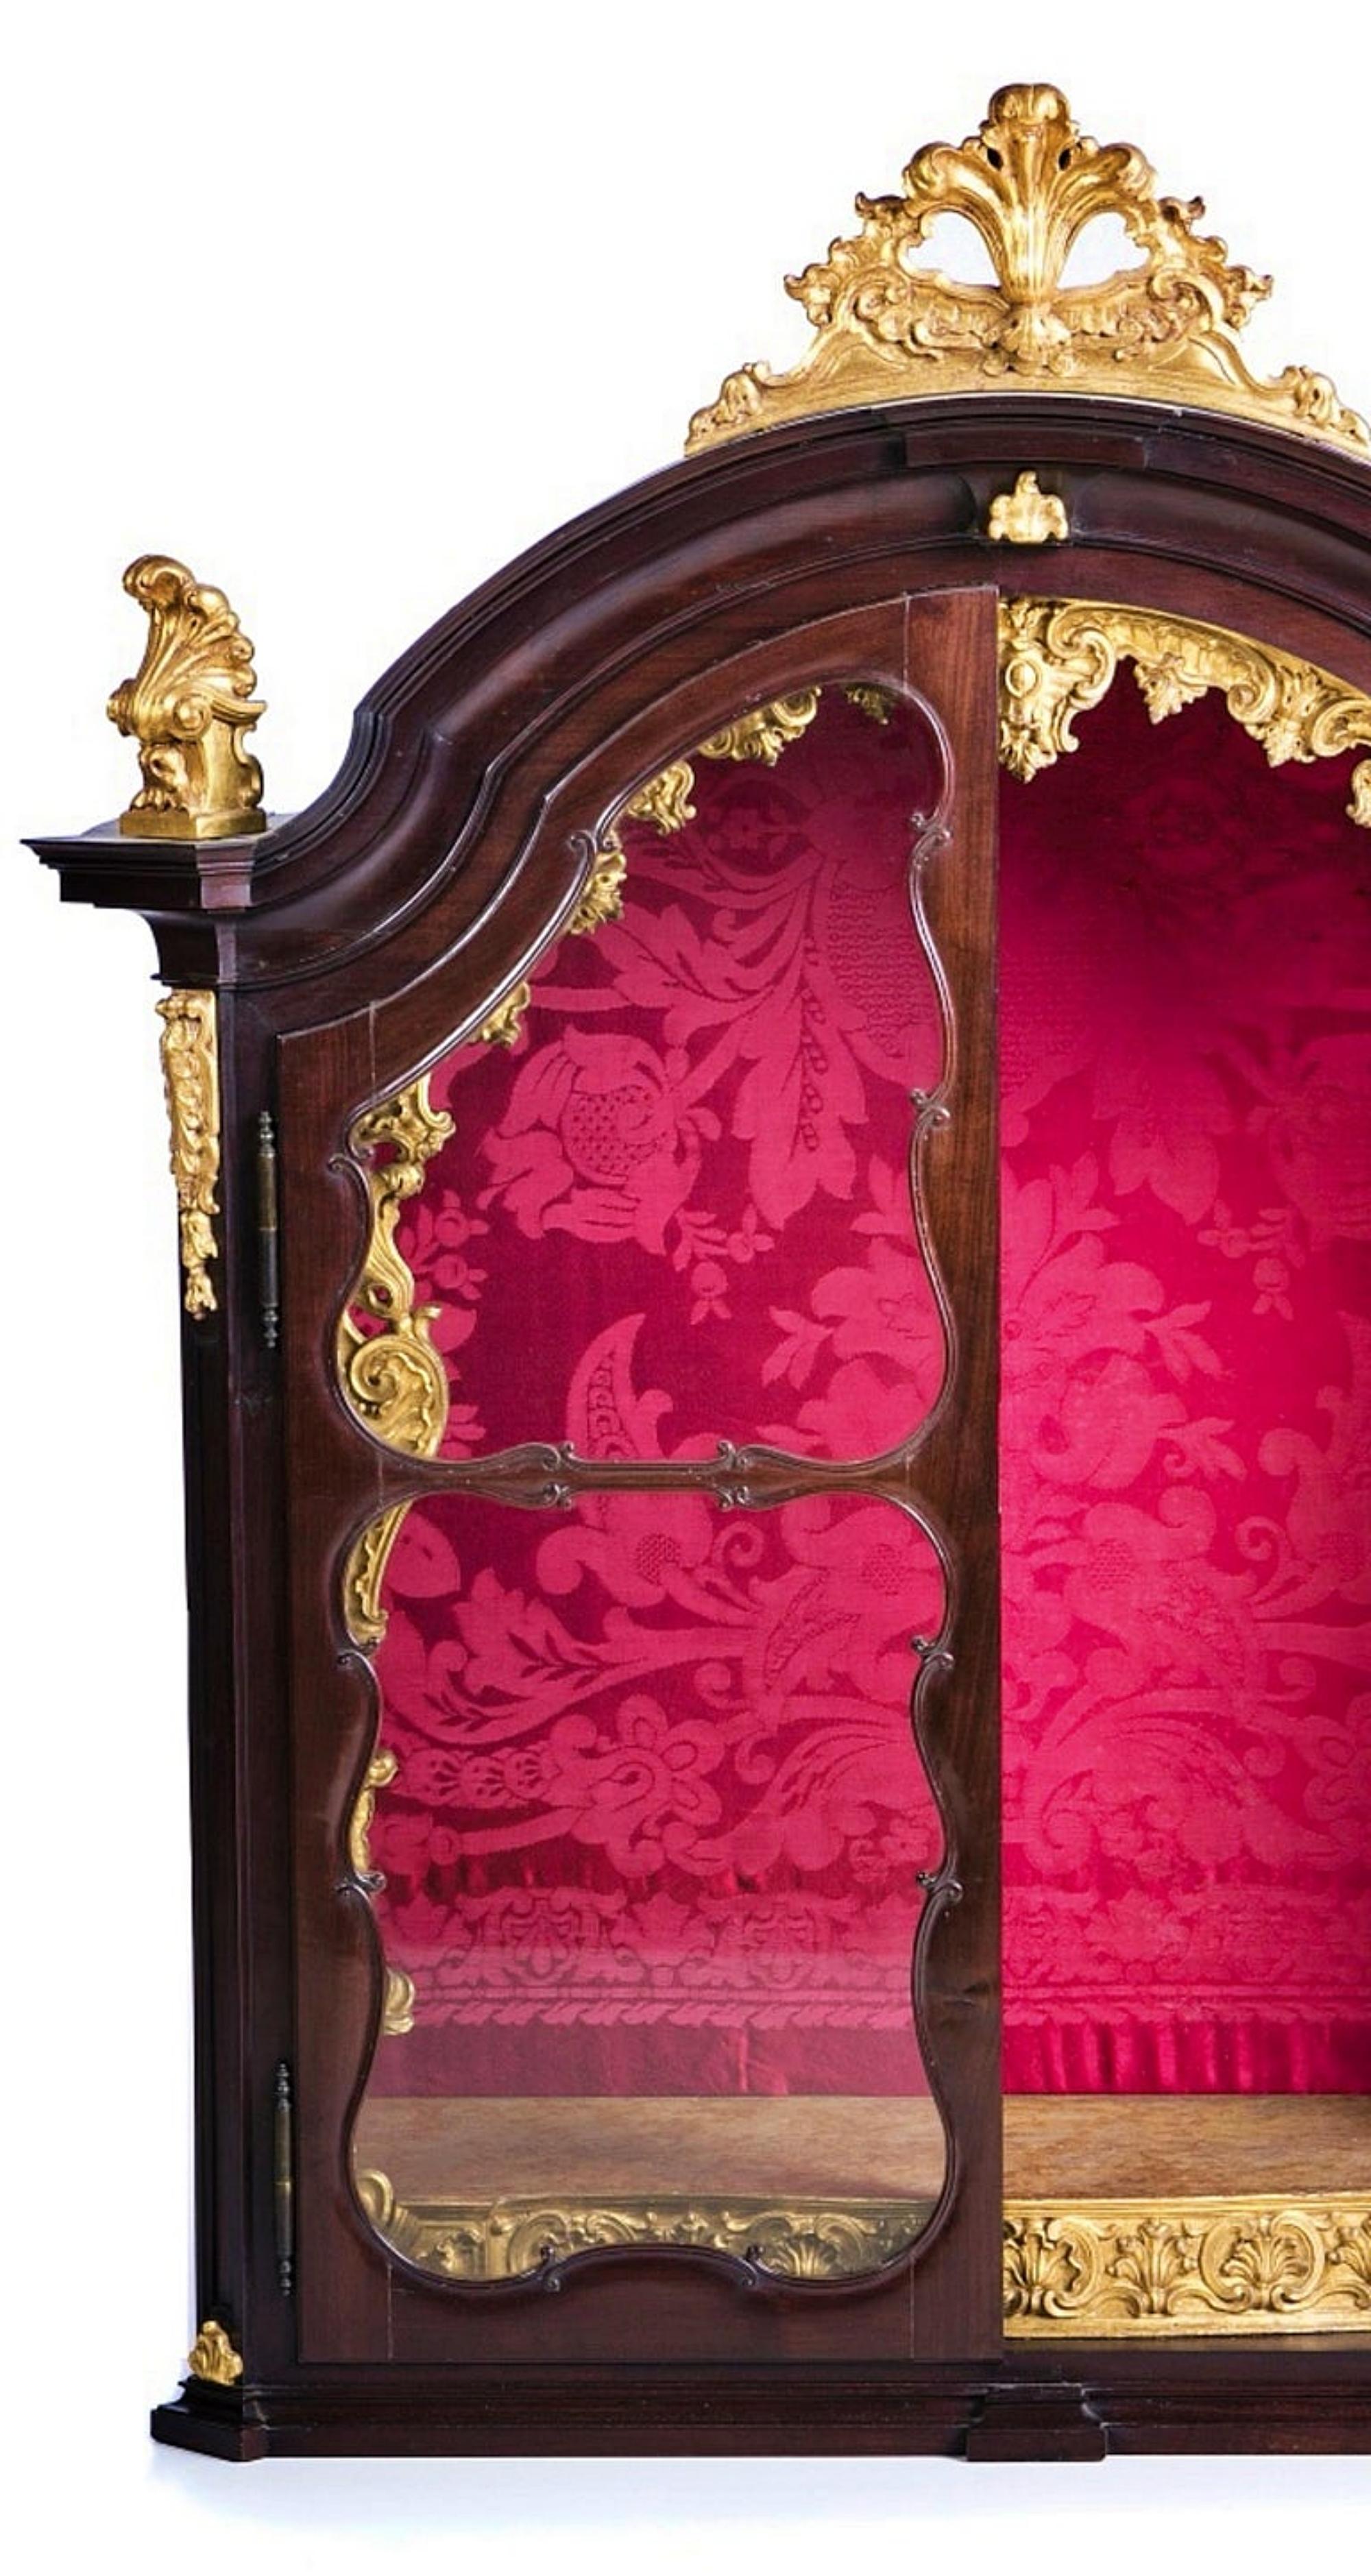 PORTUGUESE ORATORY

18th Century
in mahogany wood with gilding. Glass doors. Interior with apricot.
Dim.: 155 x 120 x 47 cm.
good conditions